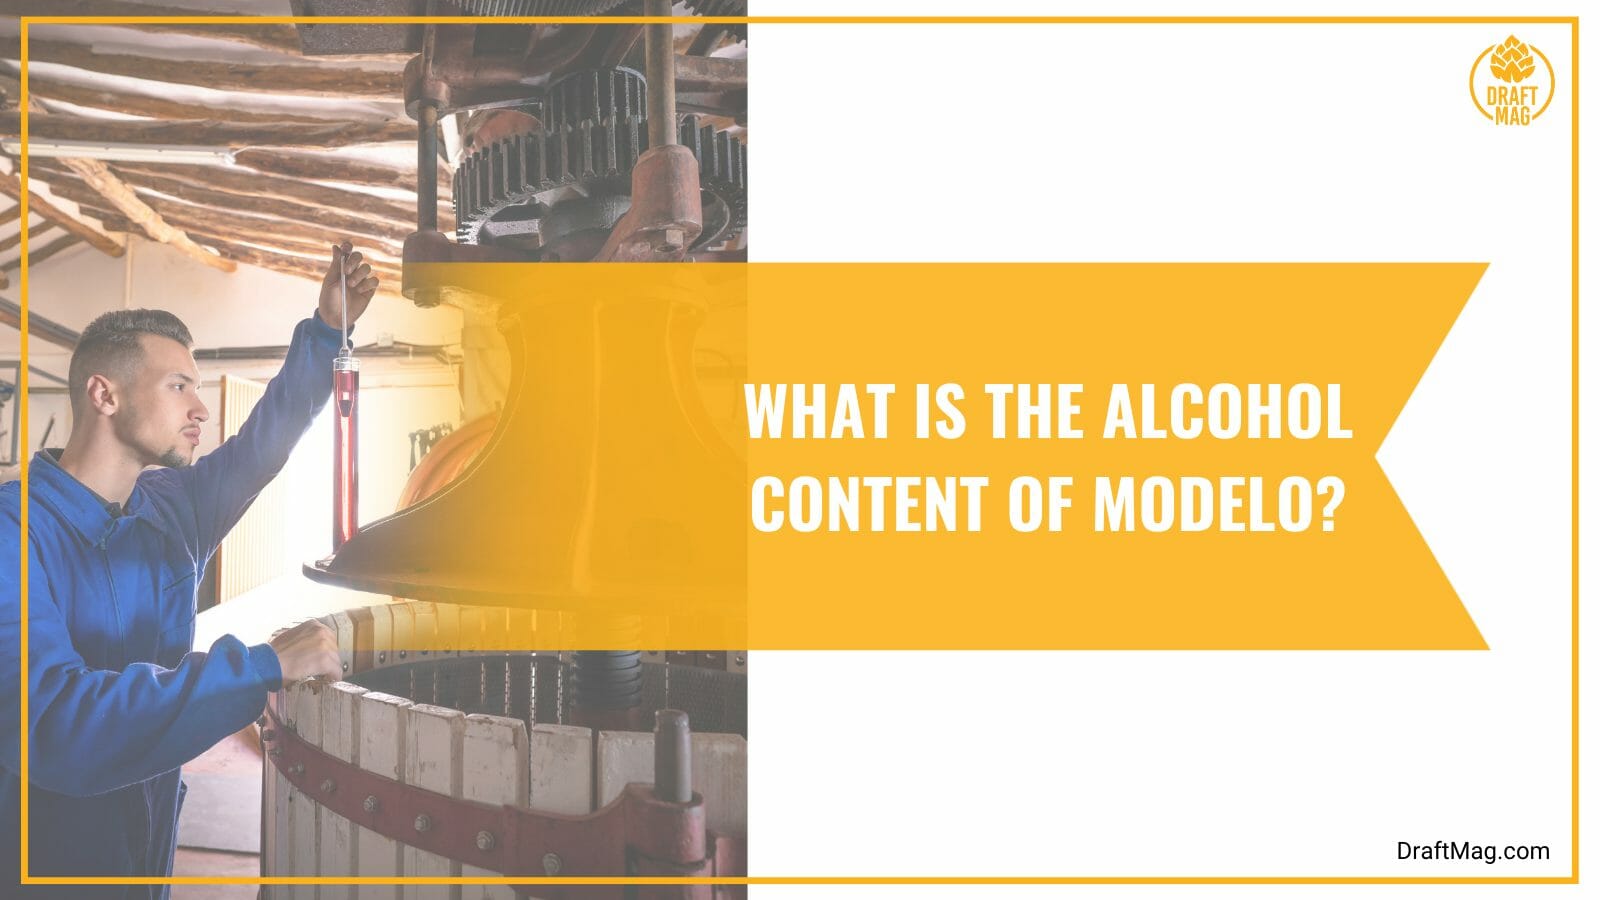 Alcohol content of modelo beer